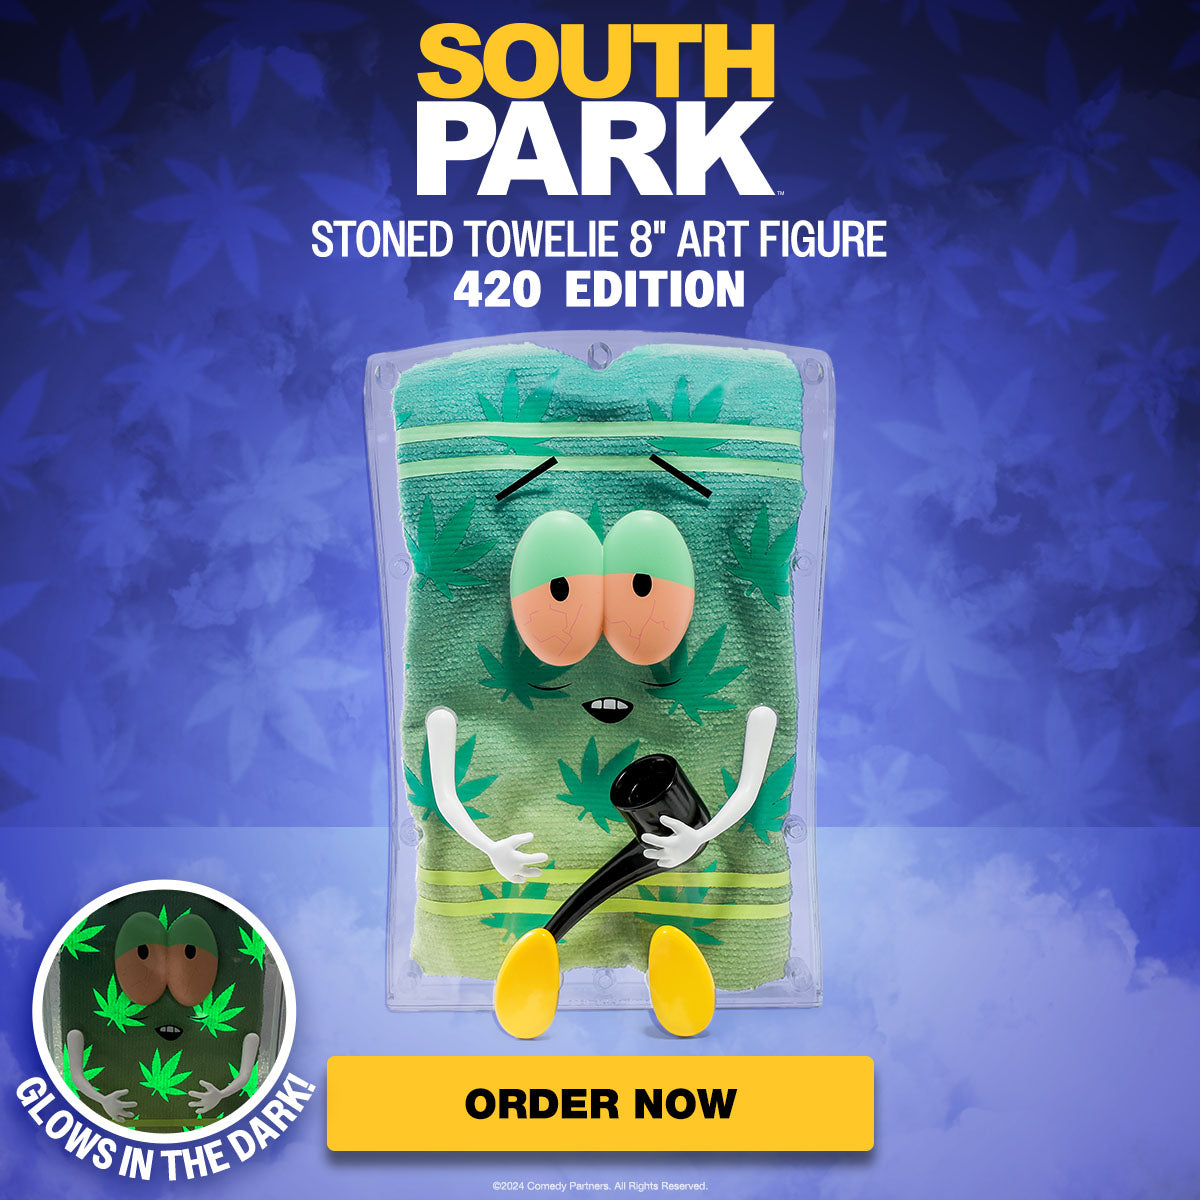 South Park Stoned Towelie with Pipe Glow-in-the-Dark Pot Leaf 8” Art Figure - 420 Edition (Kidrobot.com Exclusive) (PRE-ORDER) - Kidrobot